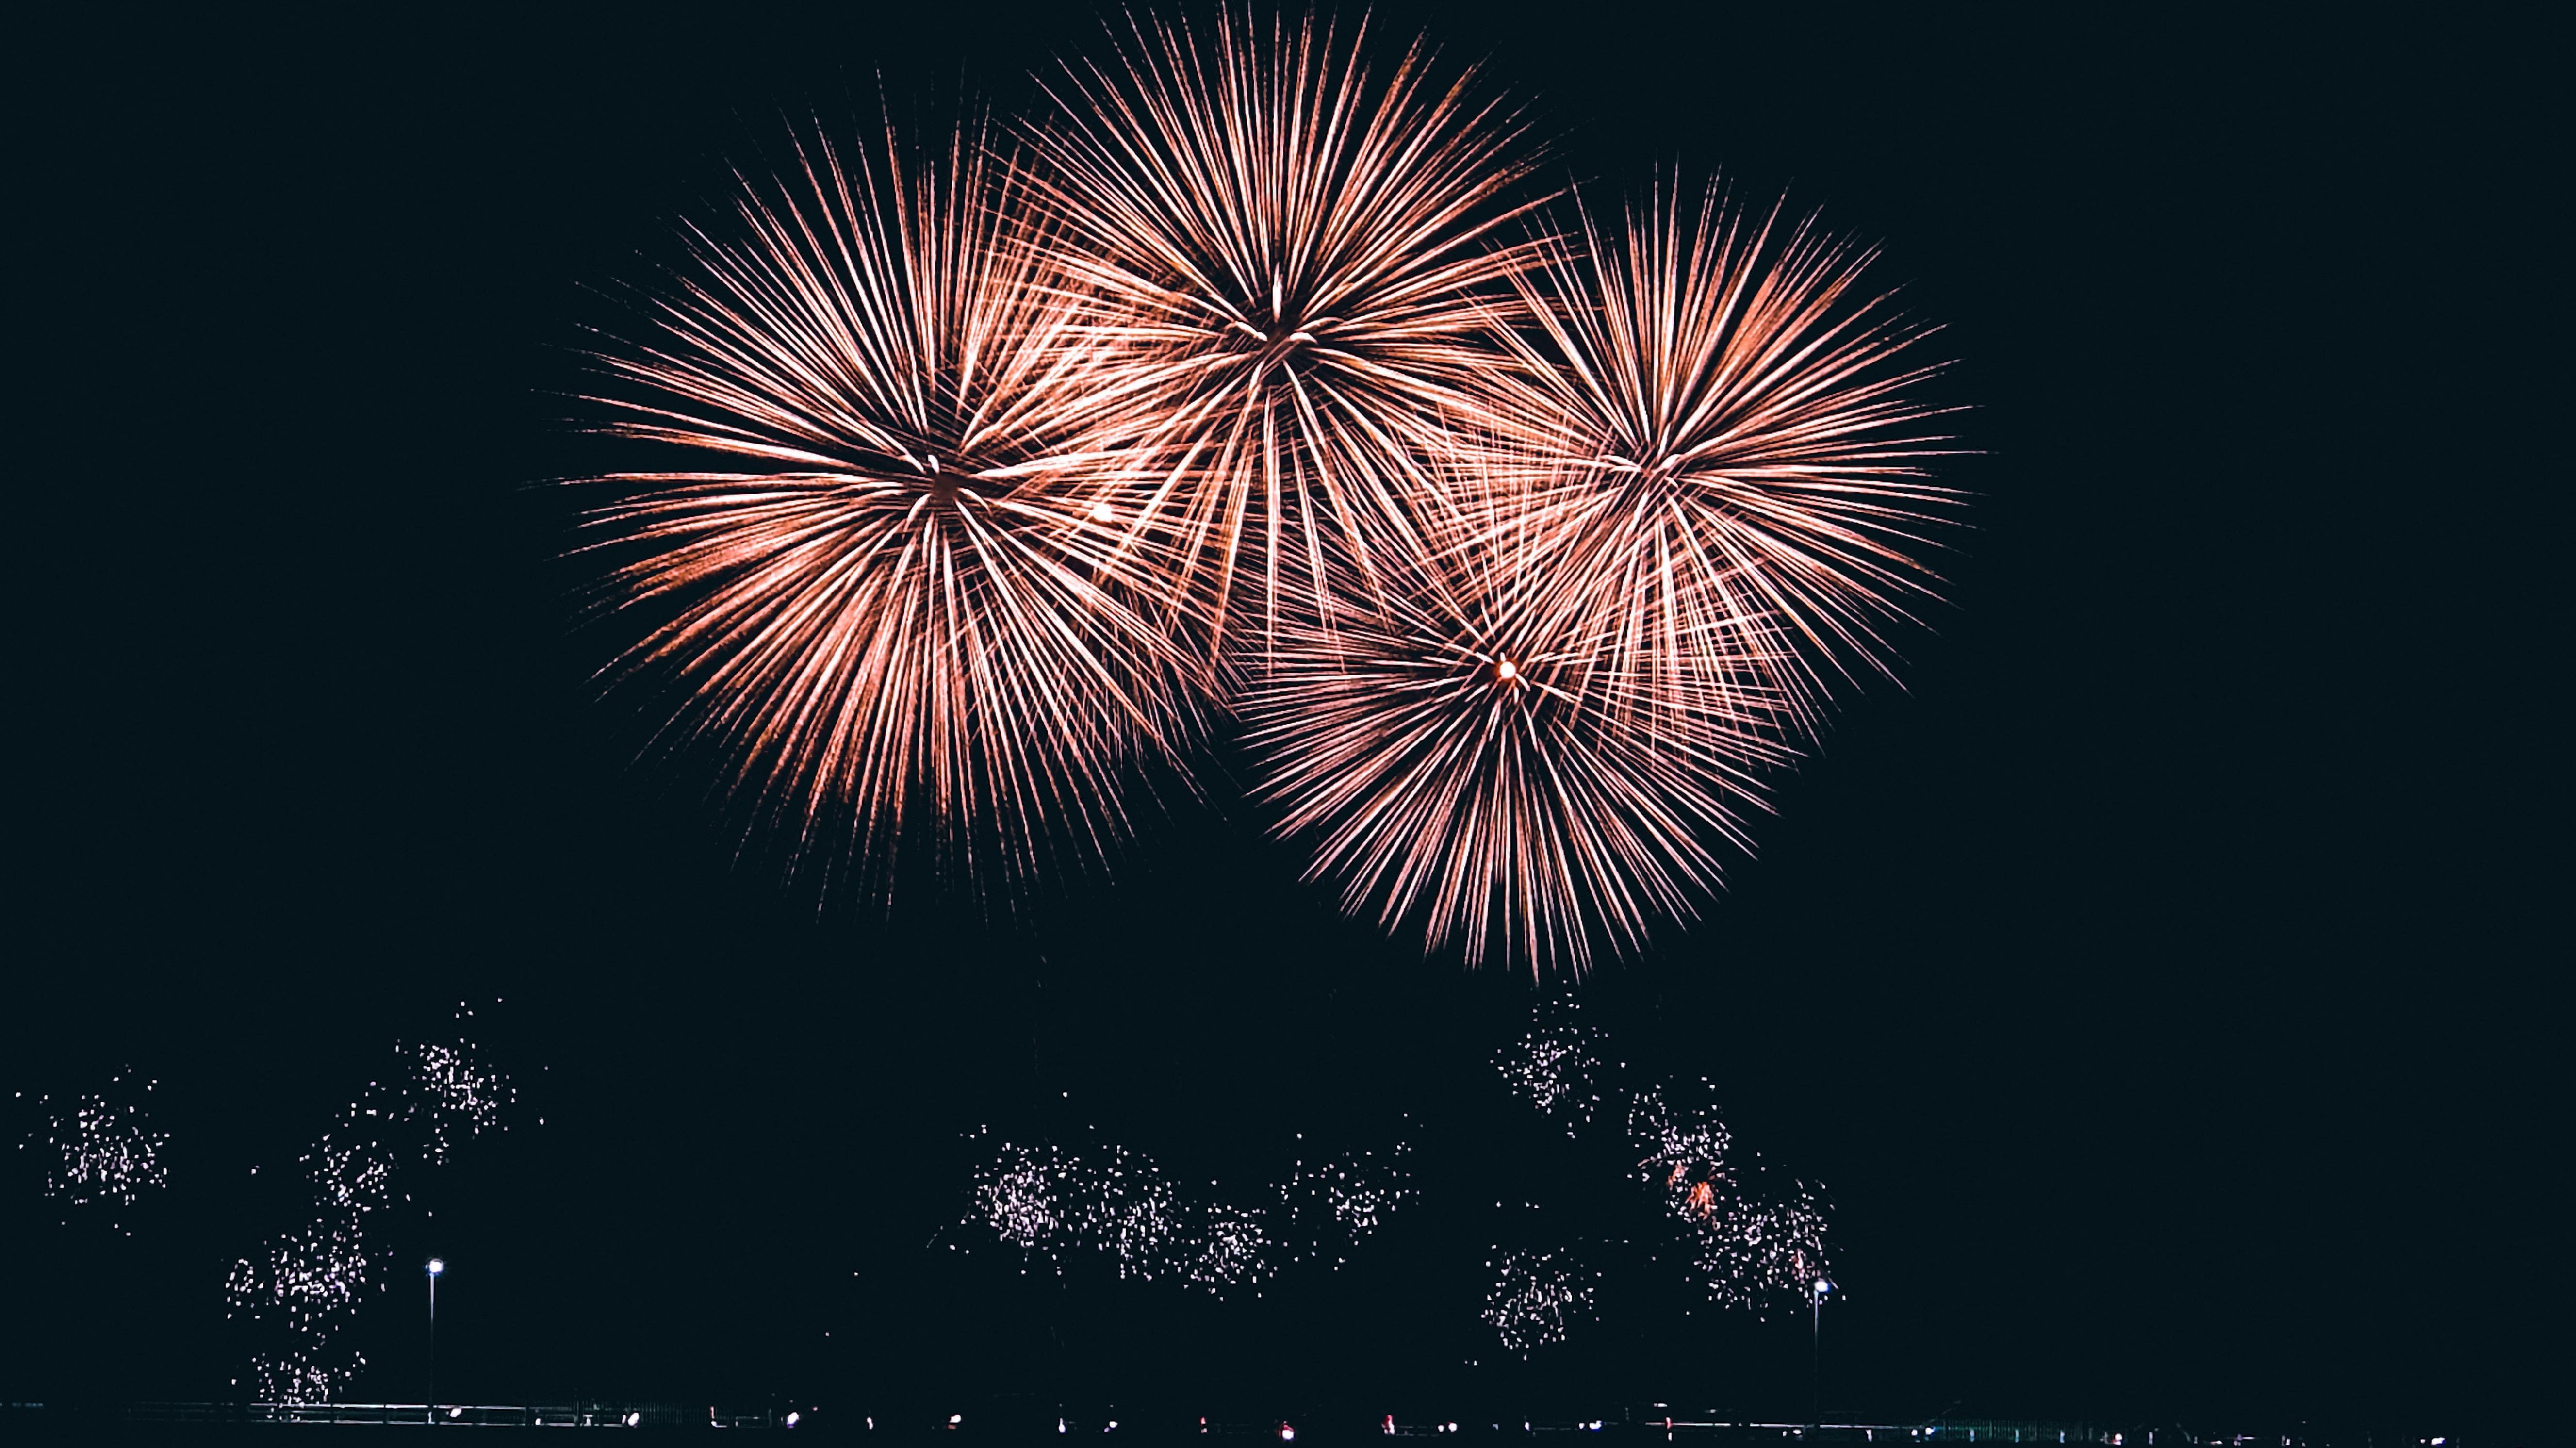 How Wedding Fireworks Displays in UK Weddings Came About